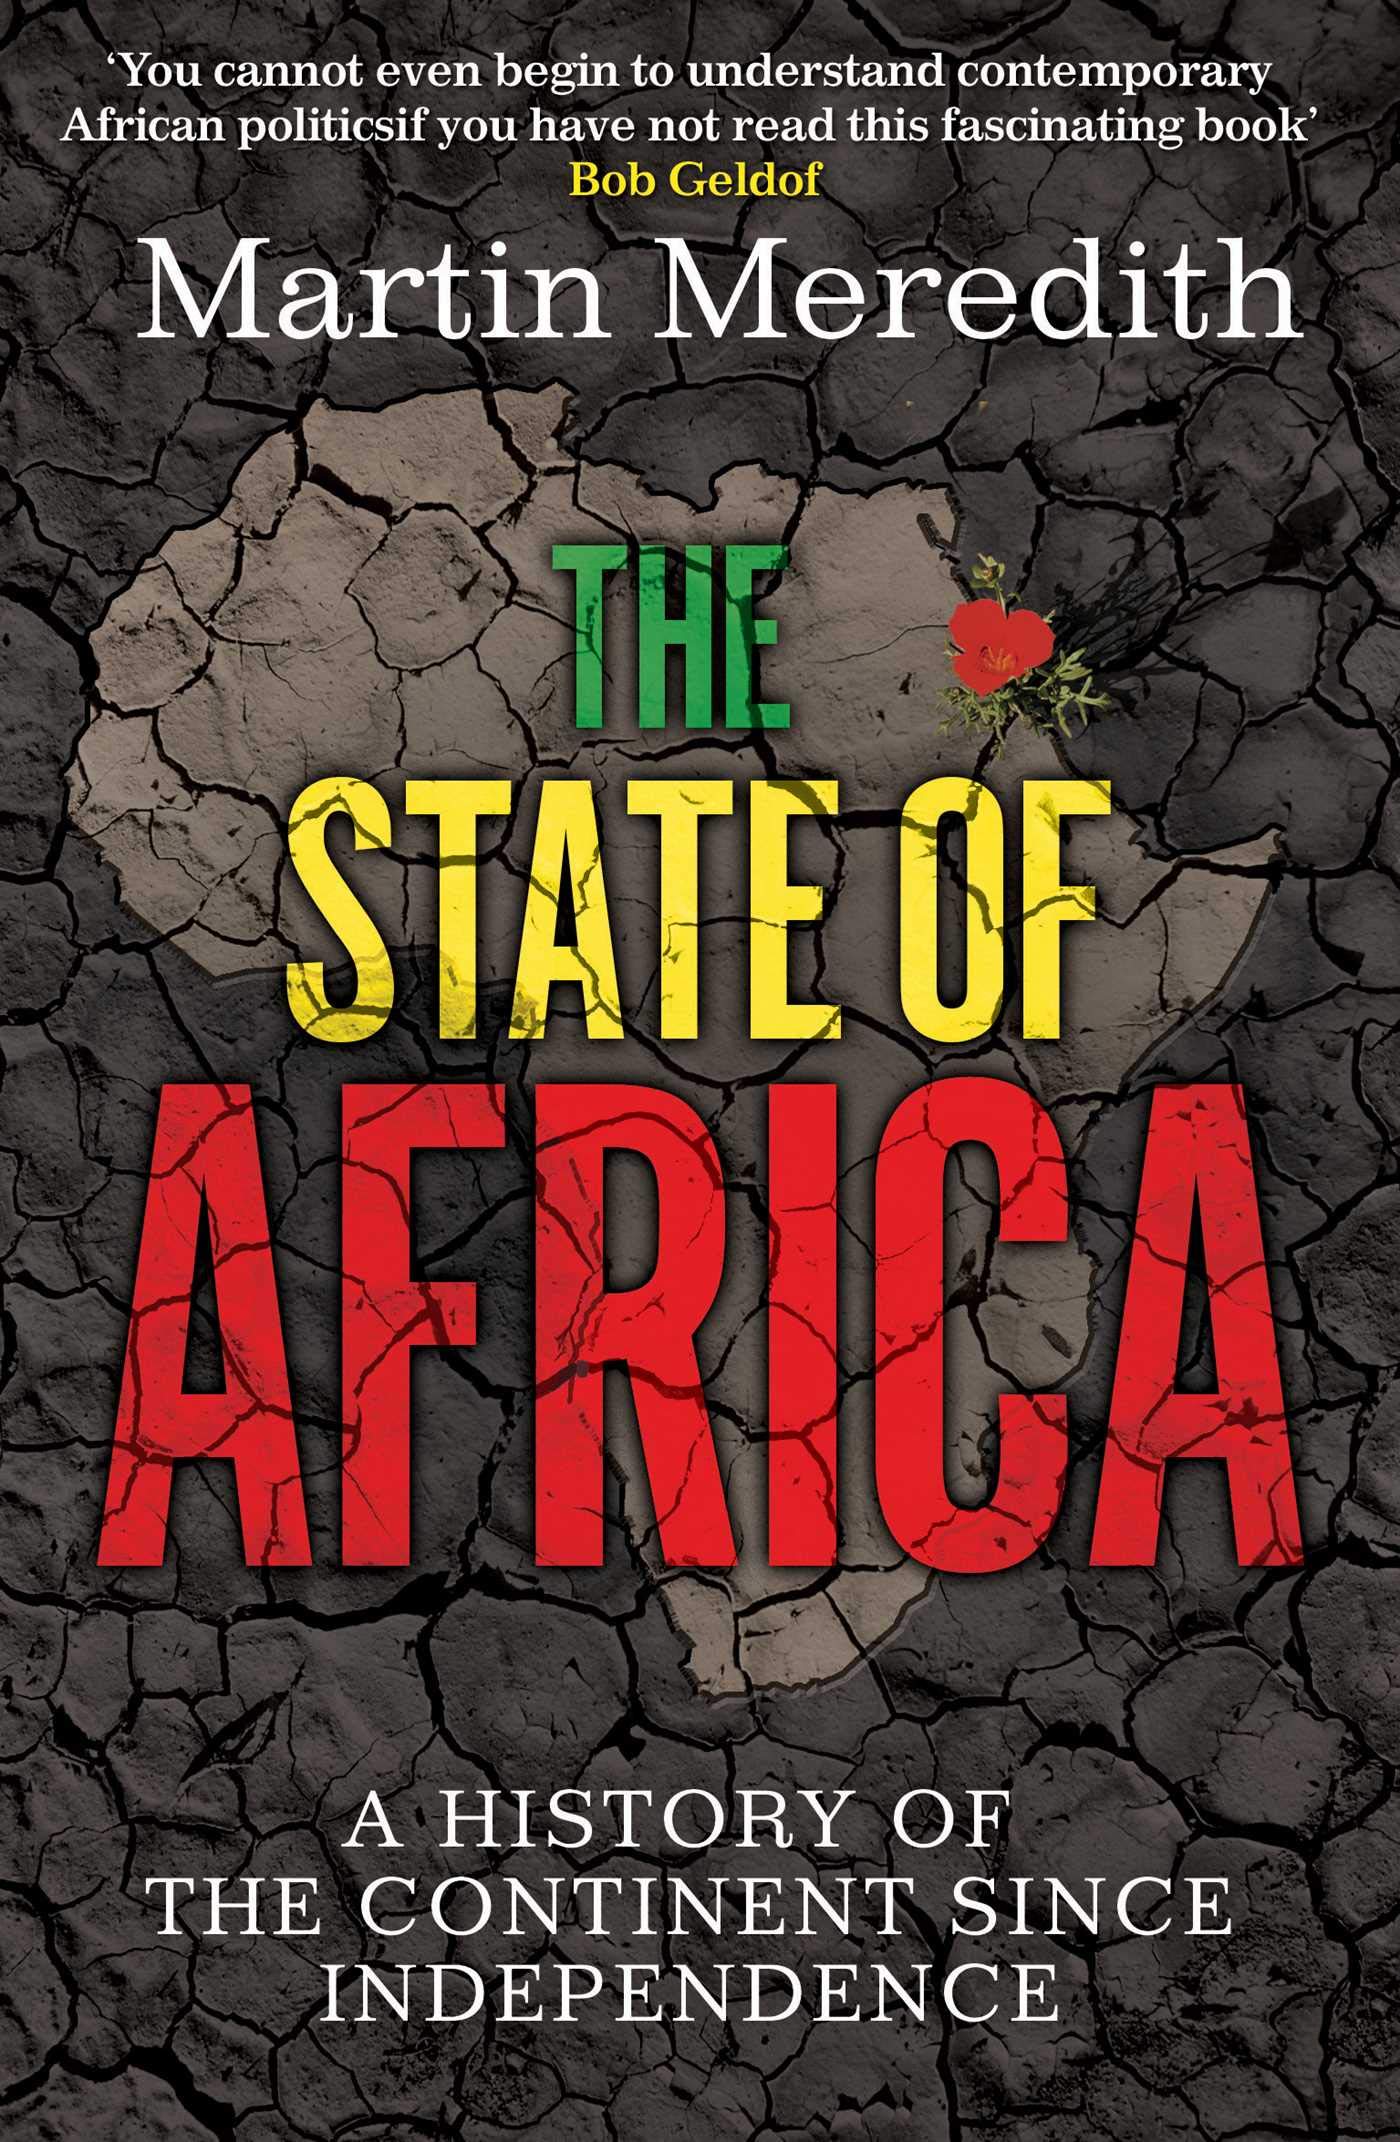 The State of Africa : The History of the Continent Since Independence